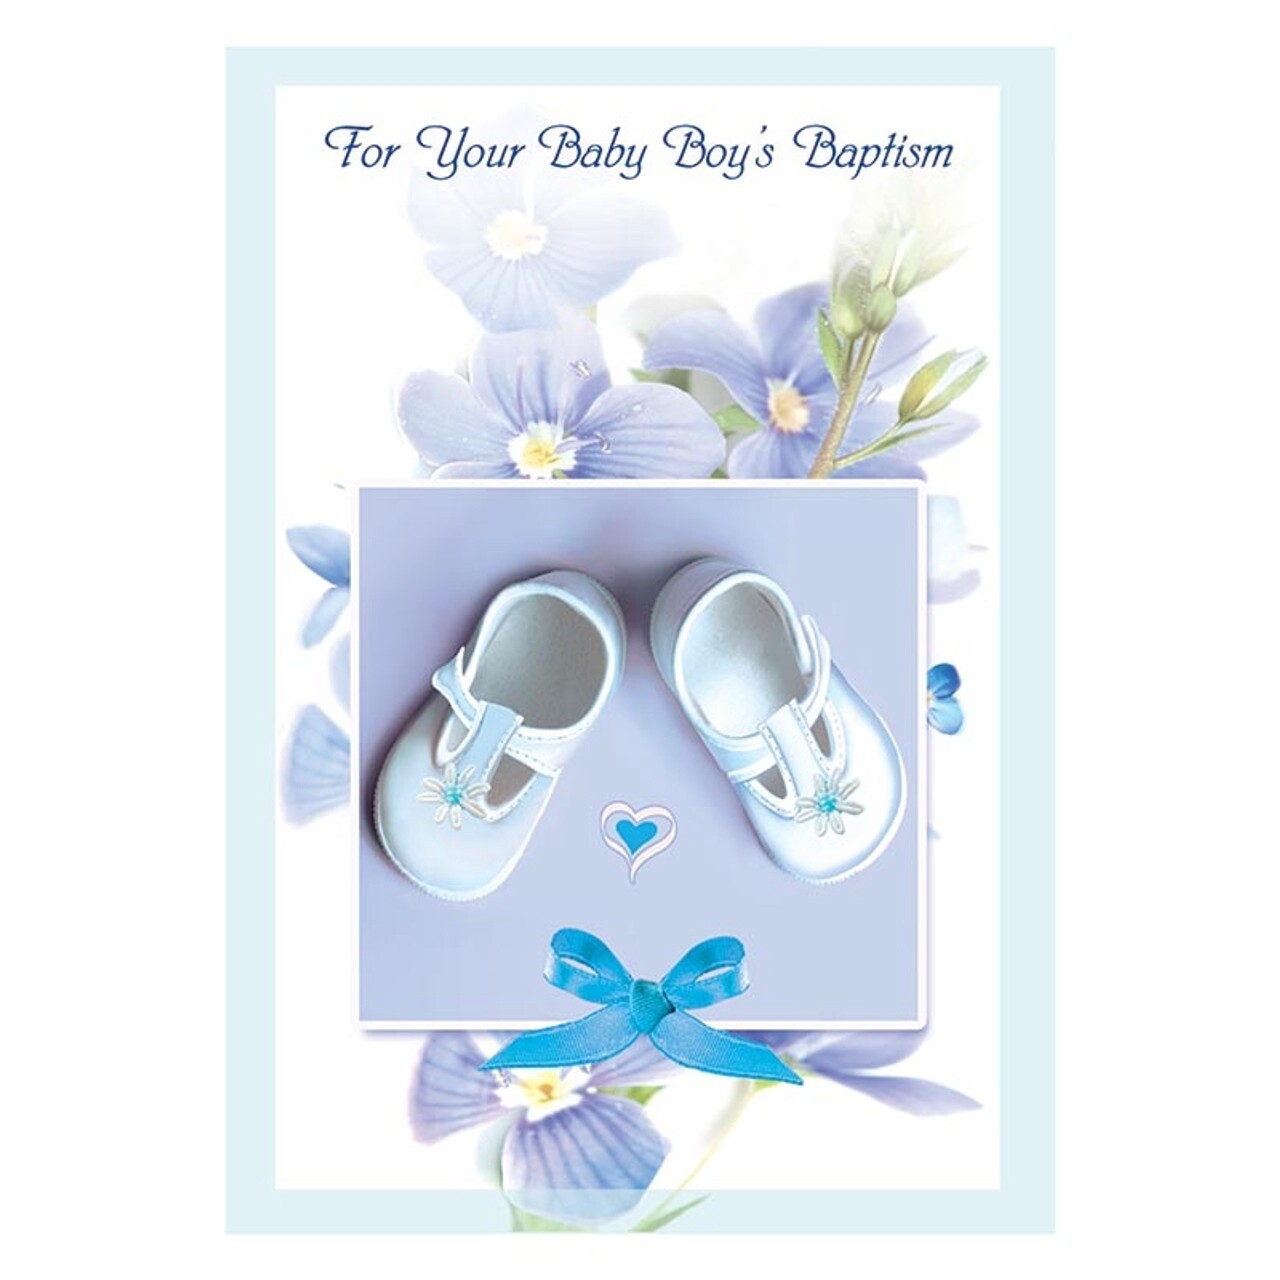 For Your Baby Boy's Baptism Card For Your Baby Boy's Baptism Card